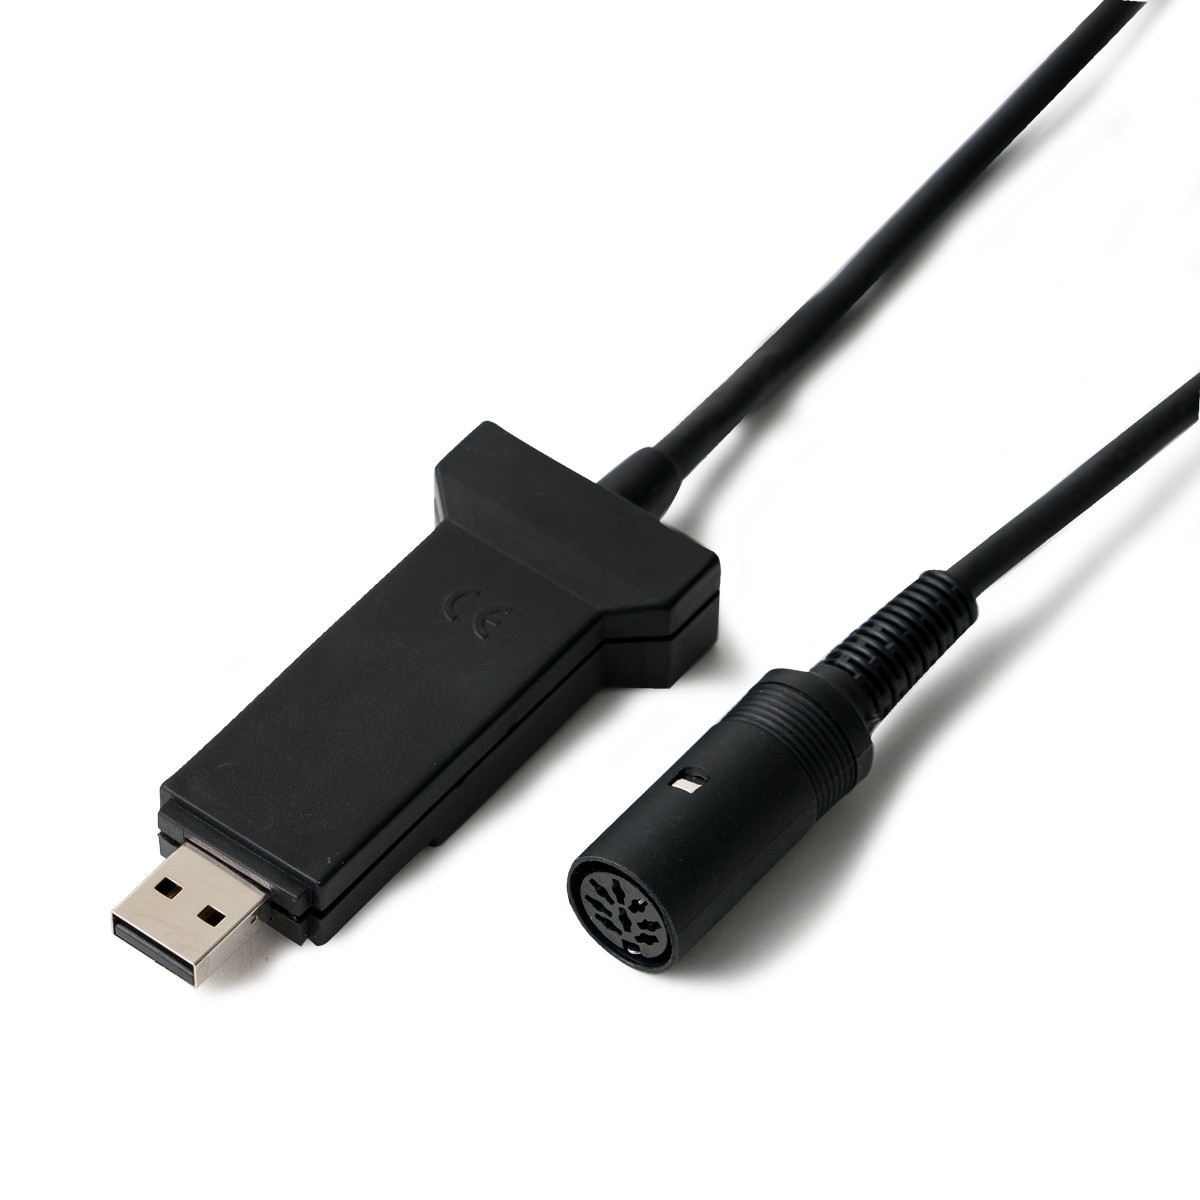 USB Cable, PC to Probe, for HI9829 Multiparameter Portable Meter - HI76982910